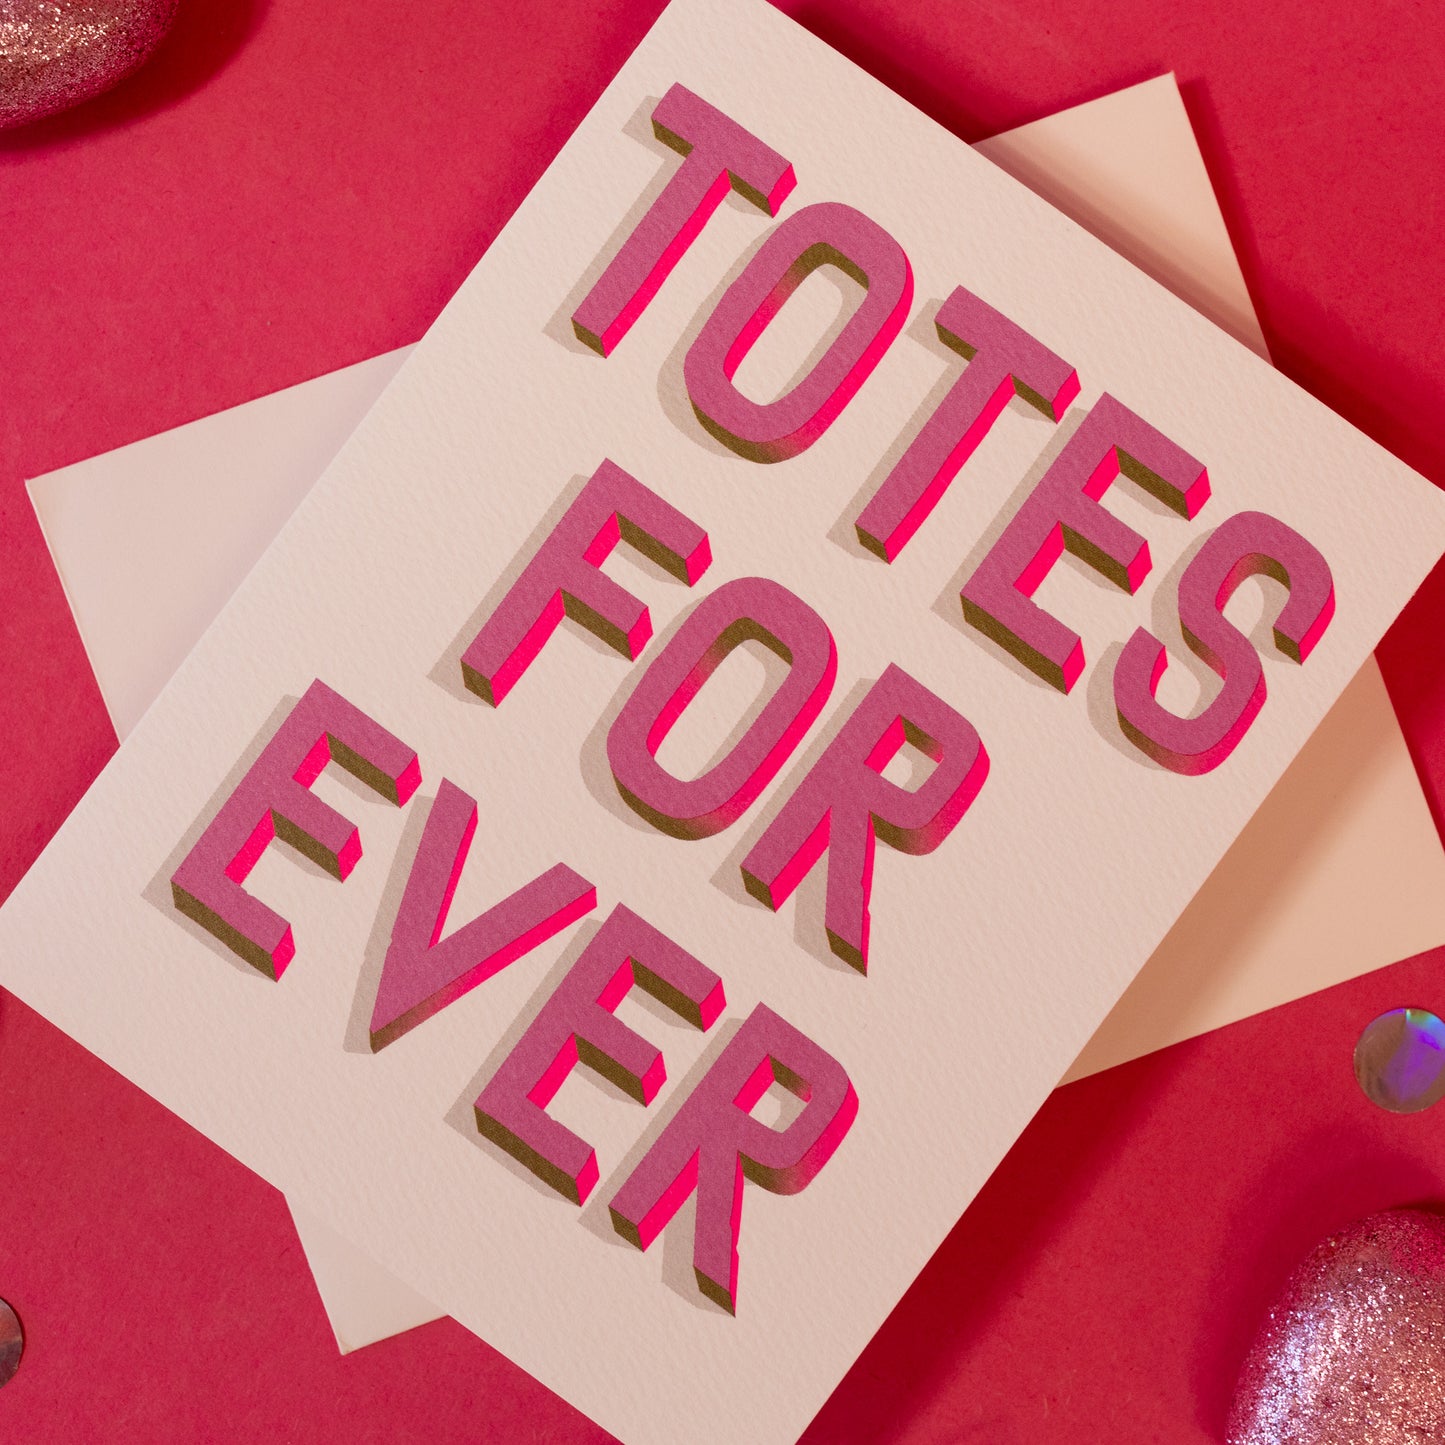 Totes Forever Card